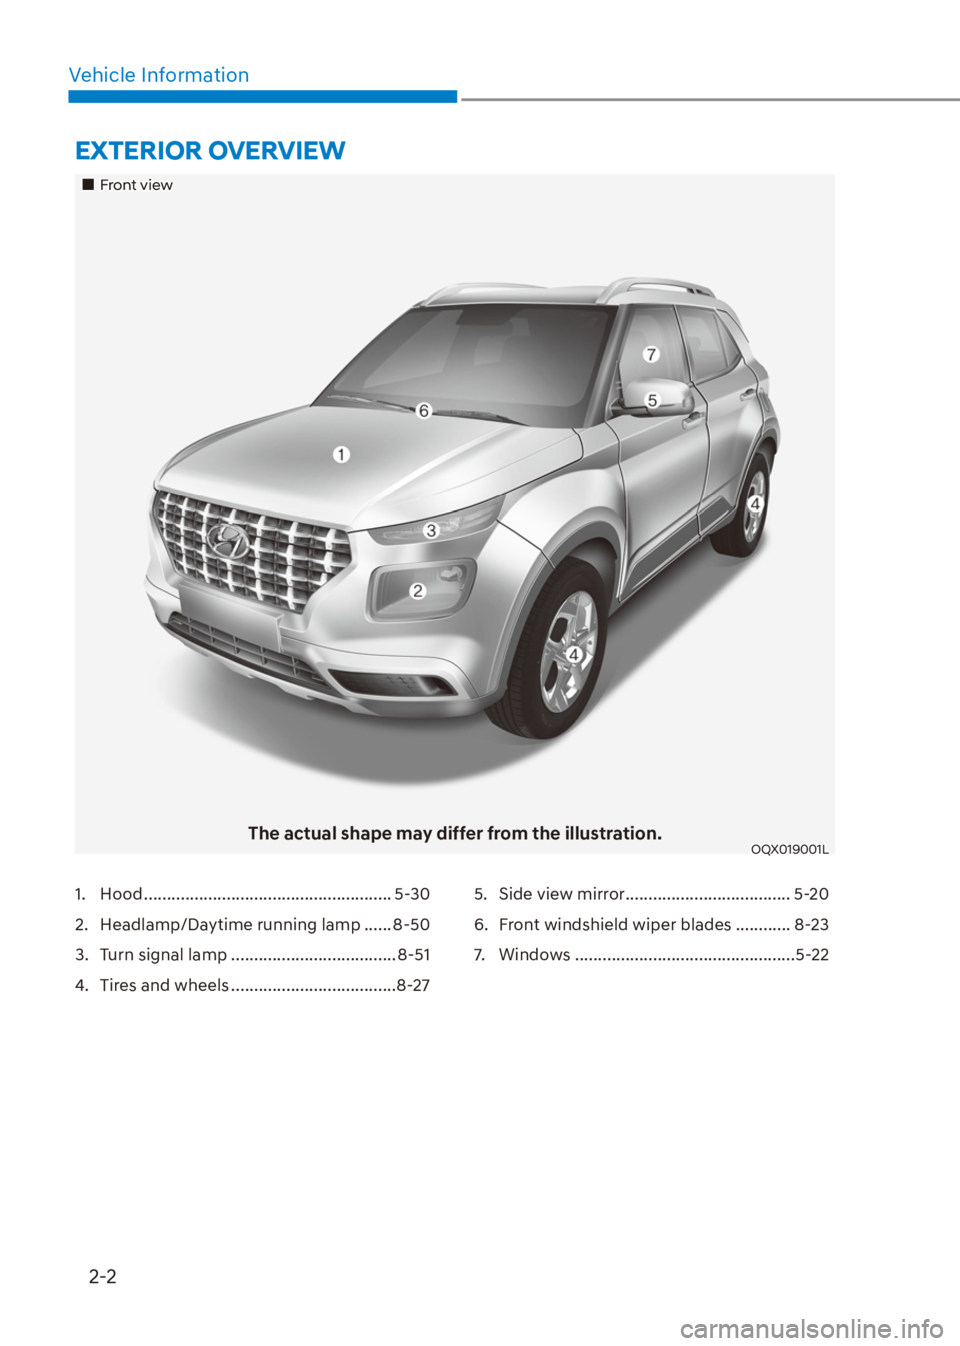 HYUNDAI VENUE 2022 User Guide 2-2
Vehicle Information
EXTERIOR OVERVIEW
��„Front view
The actual shape may differ from the illustration.OQX019001L
1. Hood ...................................................... 5-30
2.  Headlamp